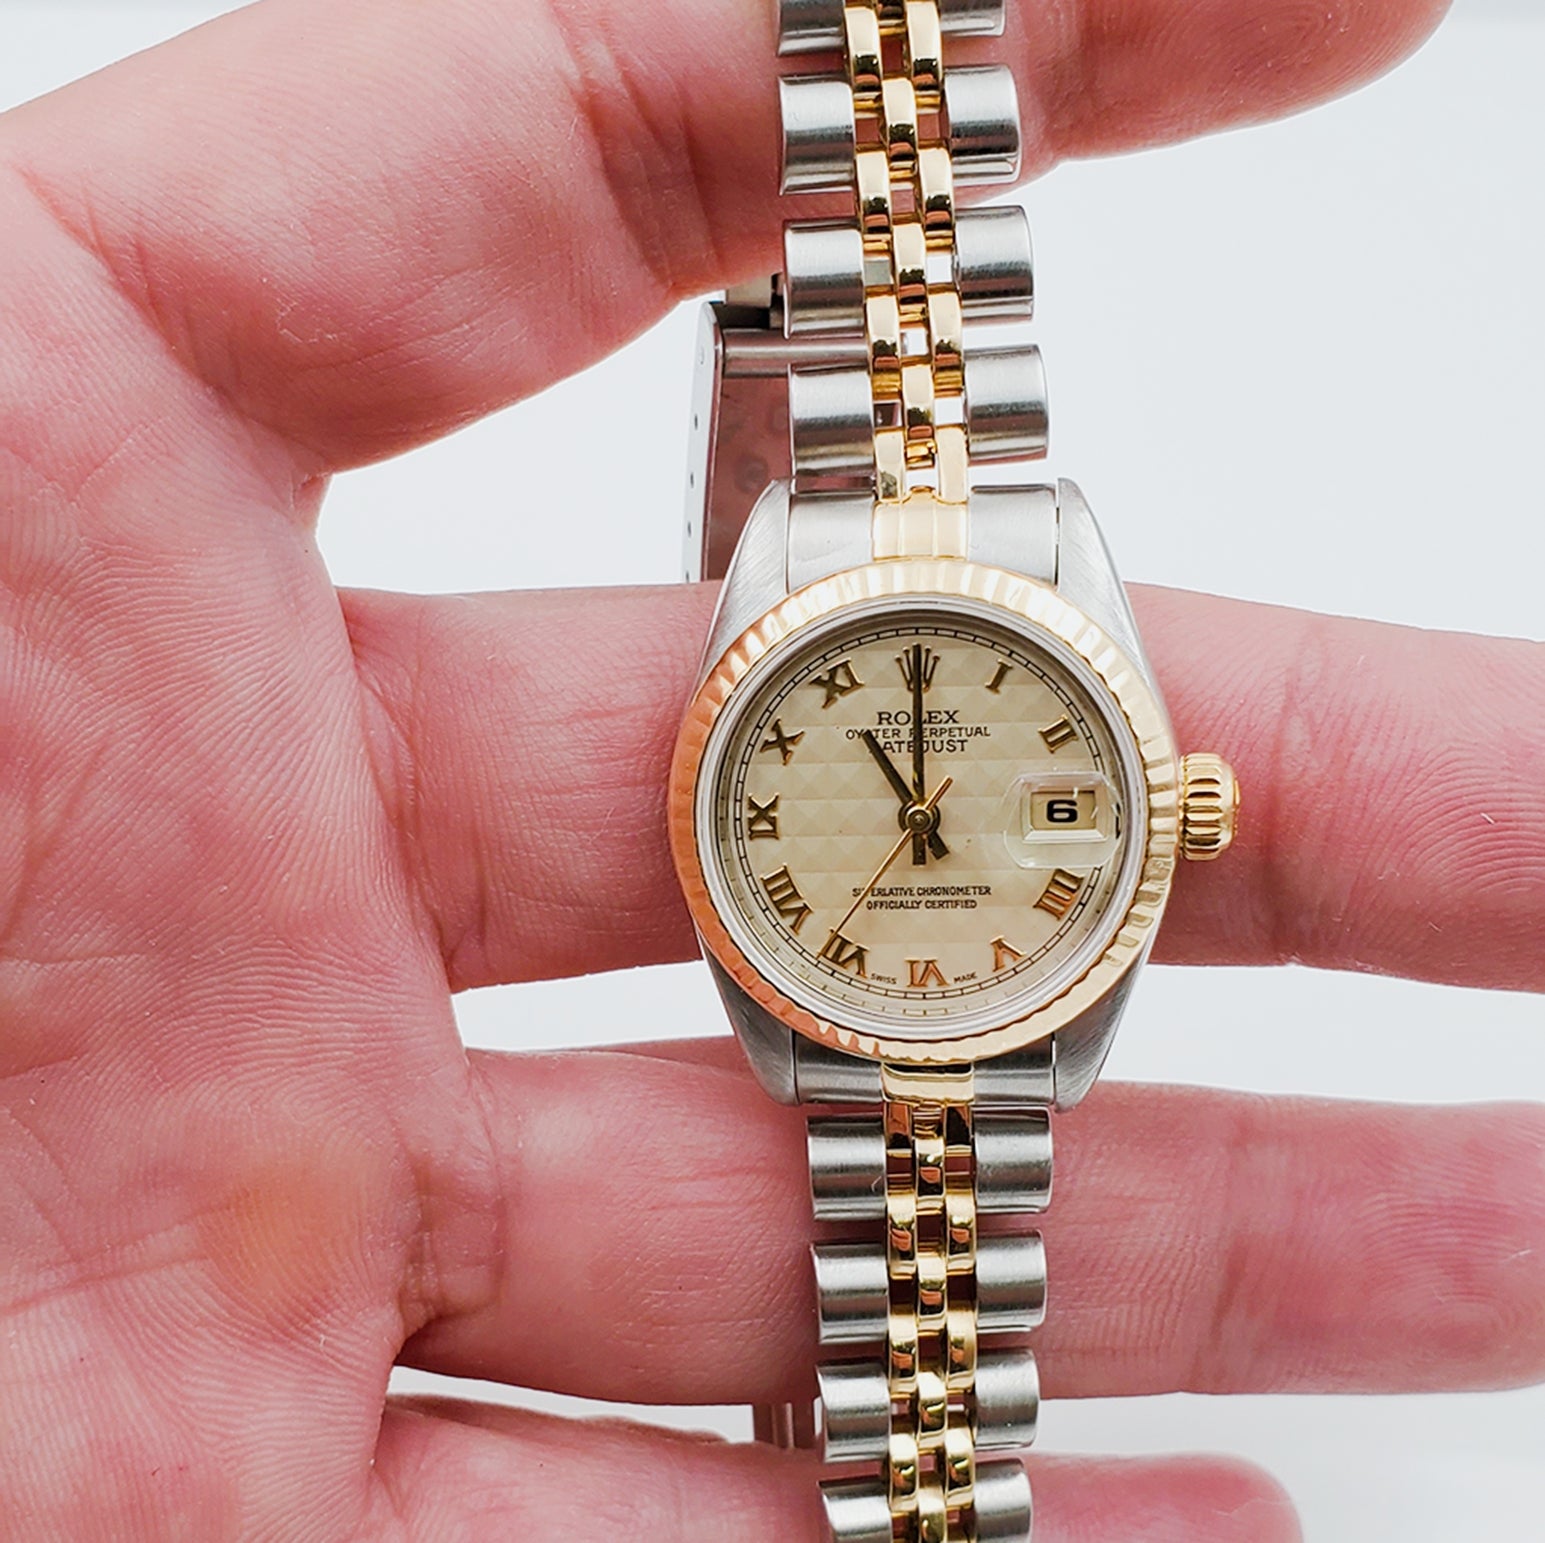 Ladies Rolex 26mm DateJust Two Tone 18K Gold / Stainless Steel Watch with 3D Gold Dial and Fluted Bezel. (Pre-Owned 16233)